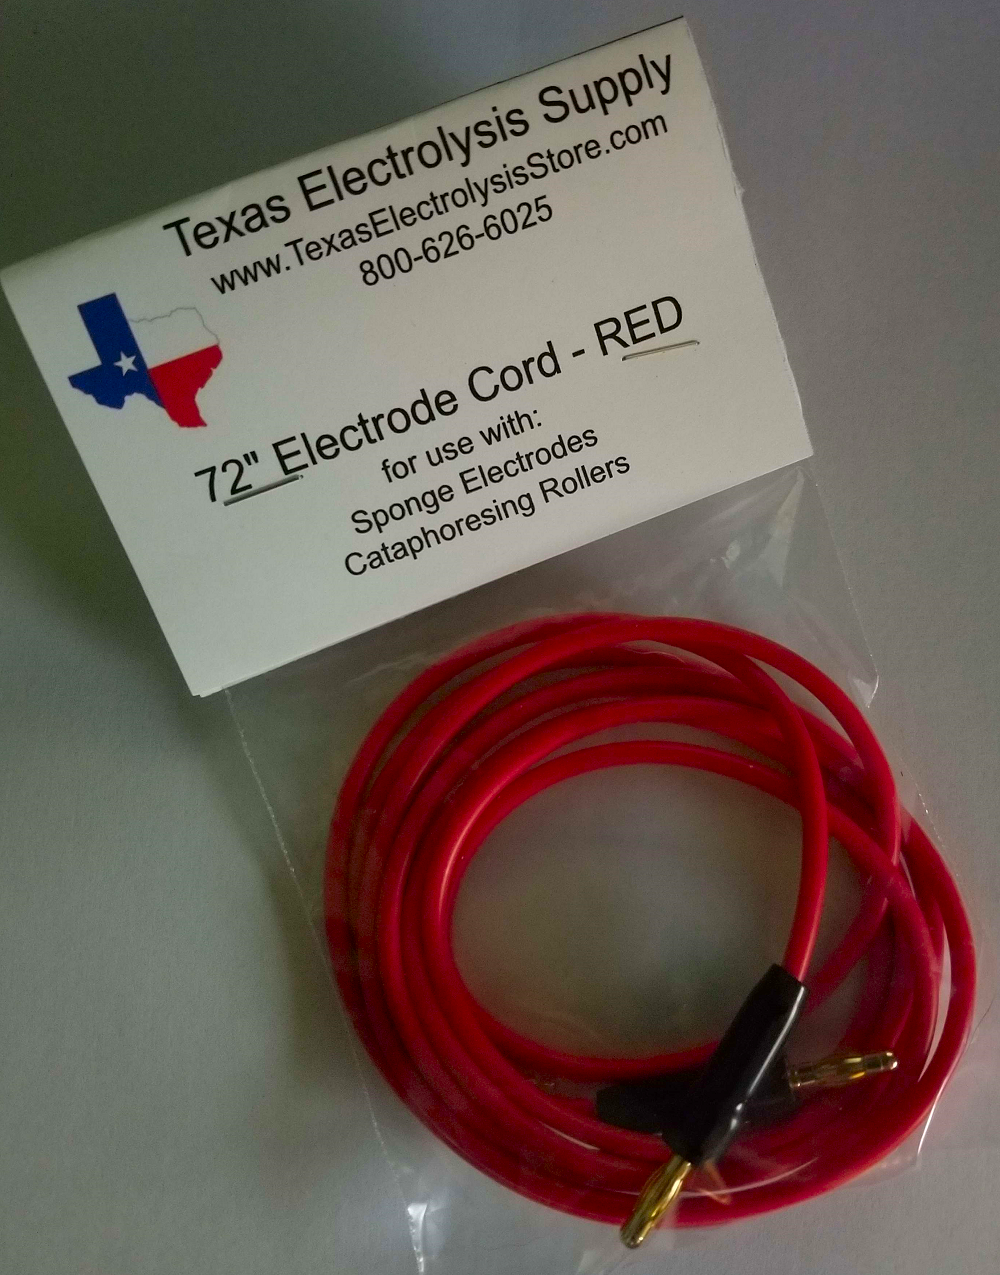 Electrode Cord (Red)